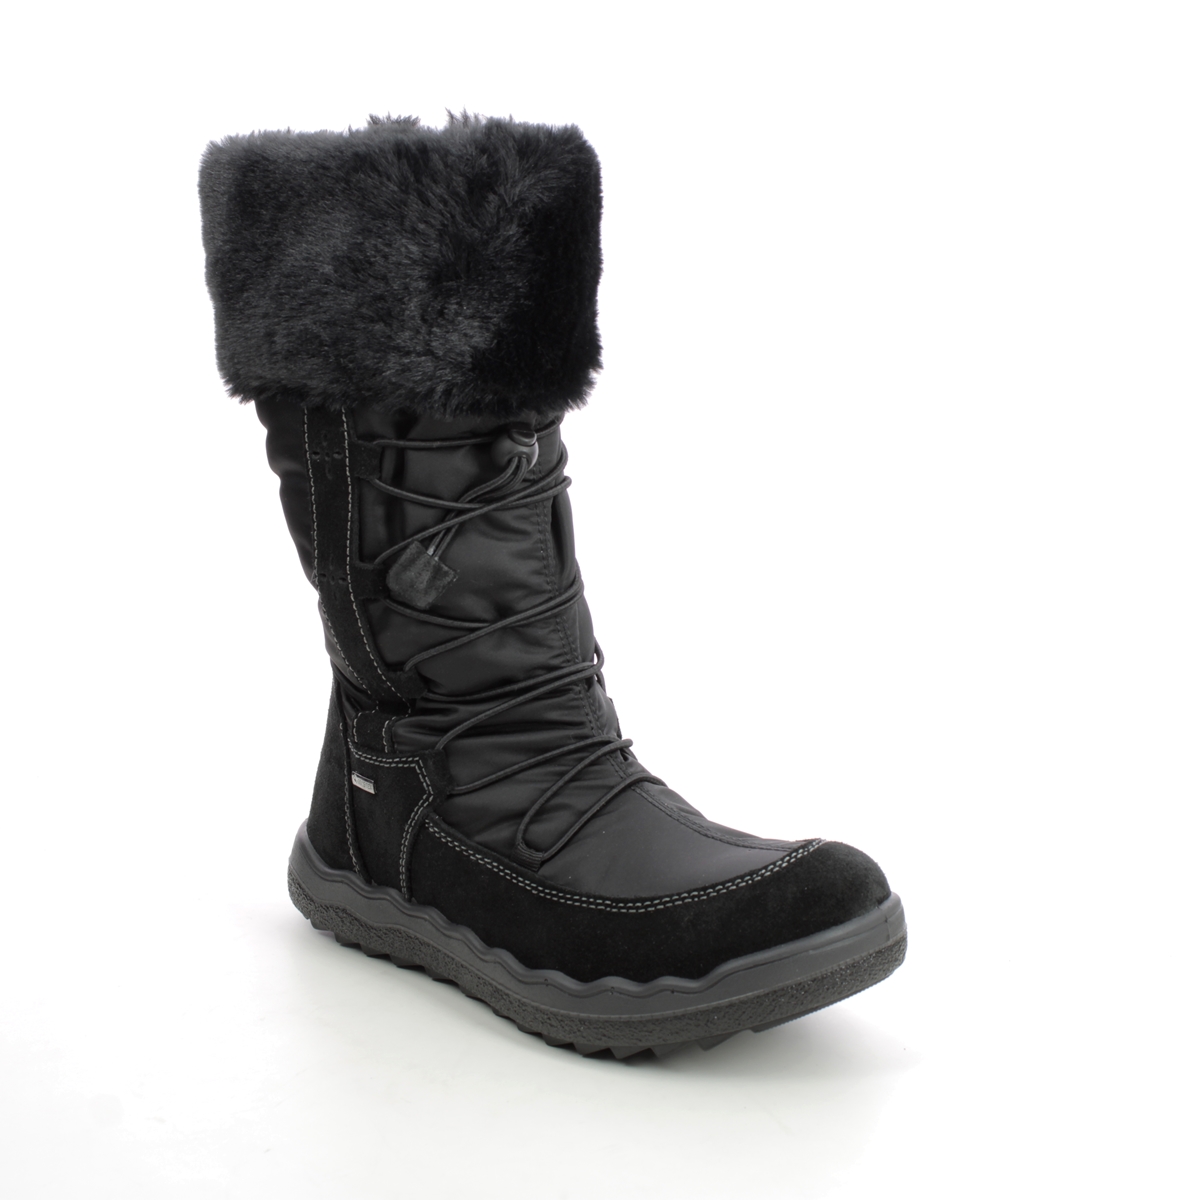 Frosty Snow 2879744- Black boots